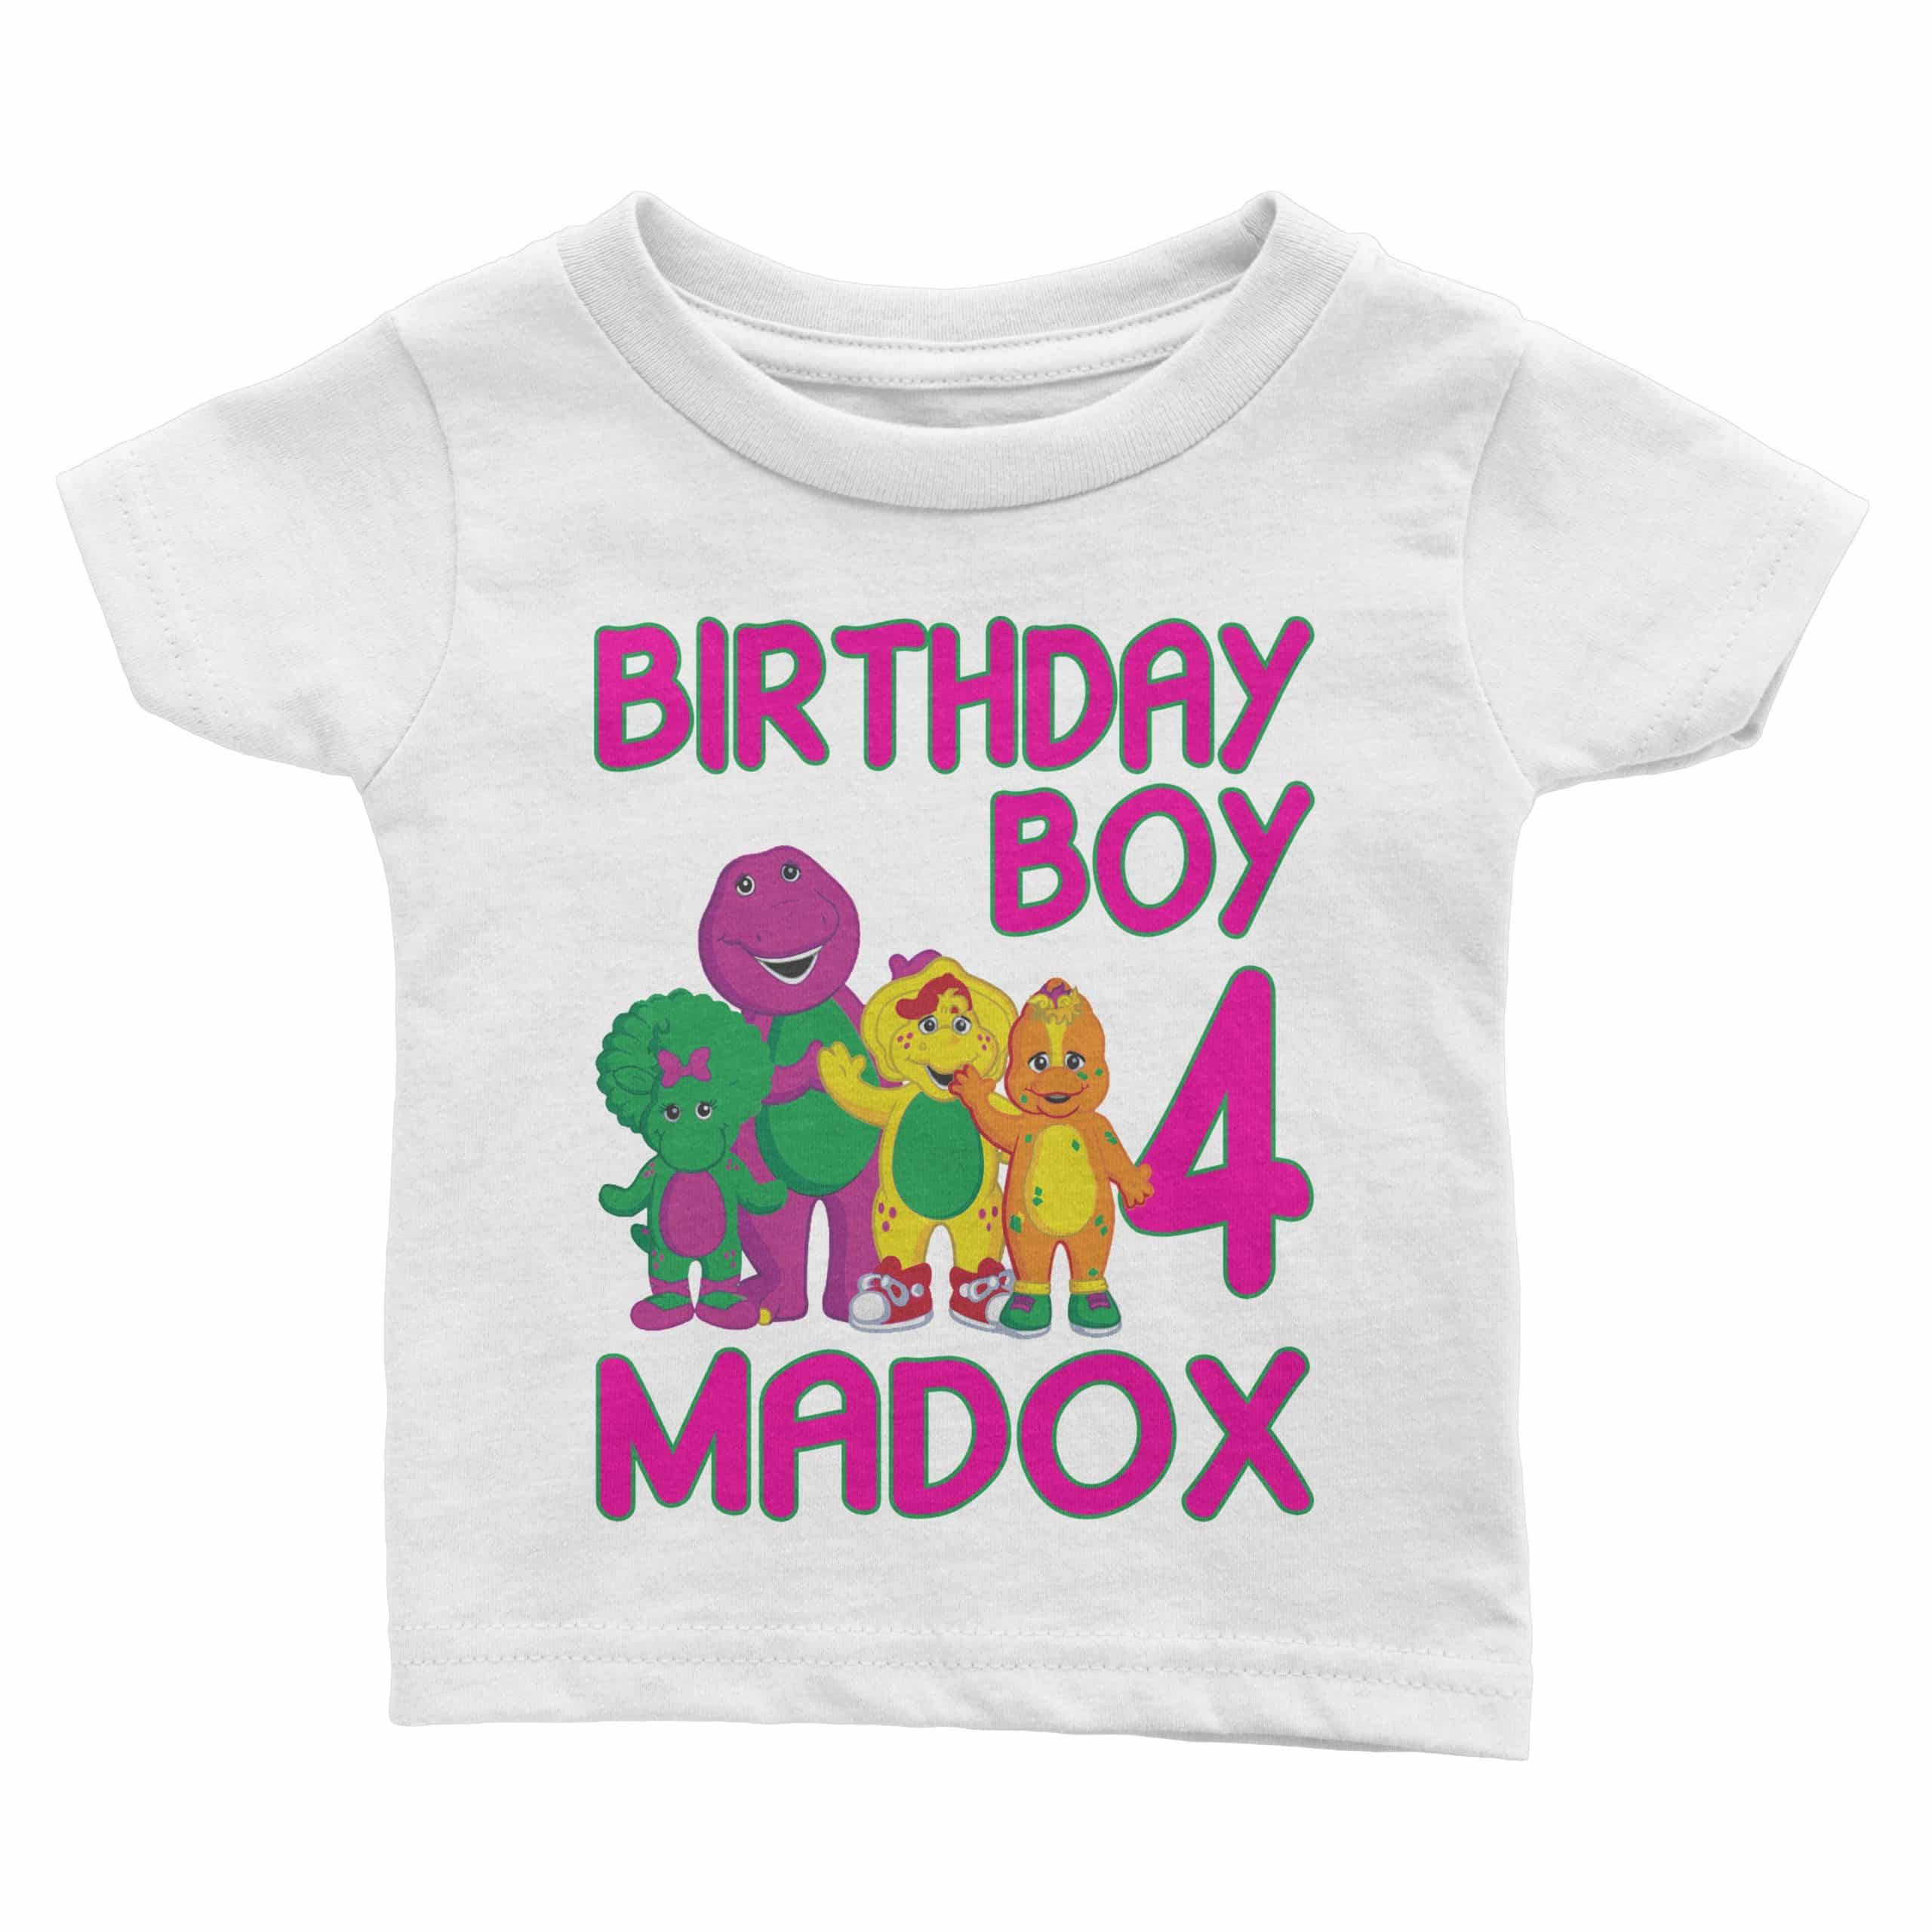 add name&message New Personalized Barney and Friends T Shirt 